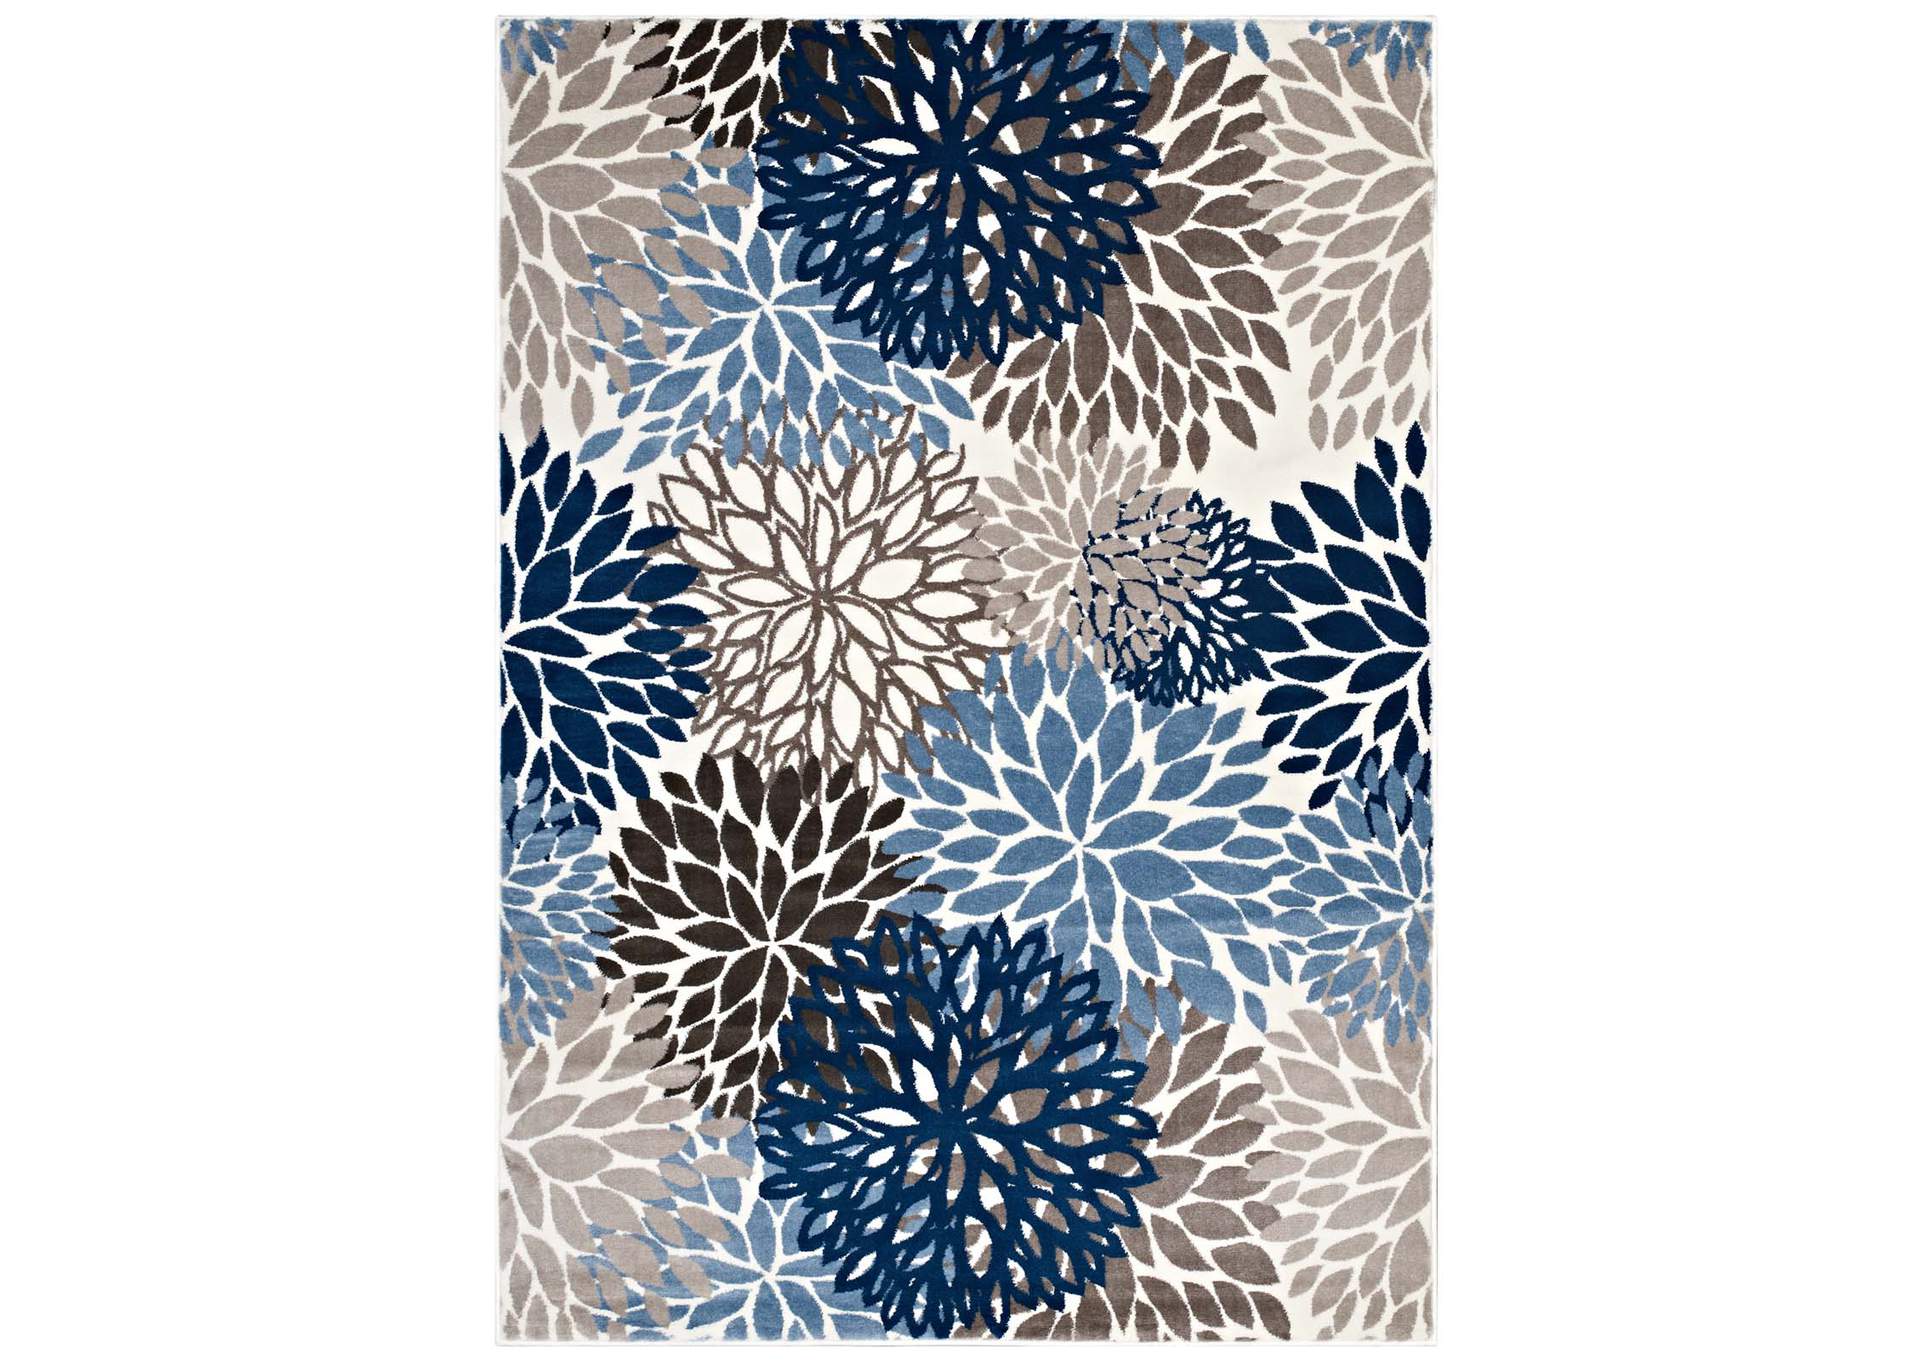 Calithea Vintage Classic Abstract Floral 4x6 Area Rug,Modway